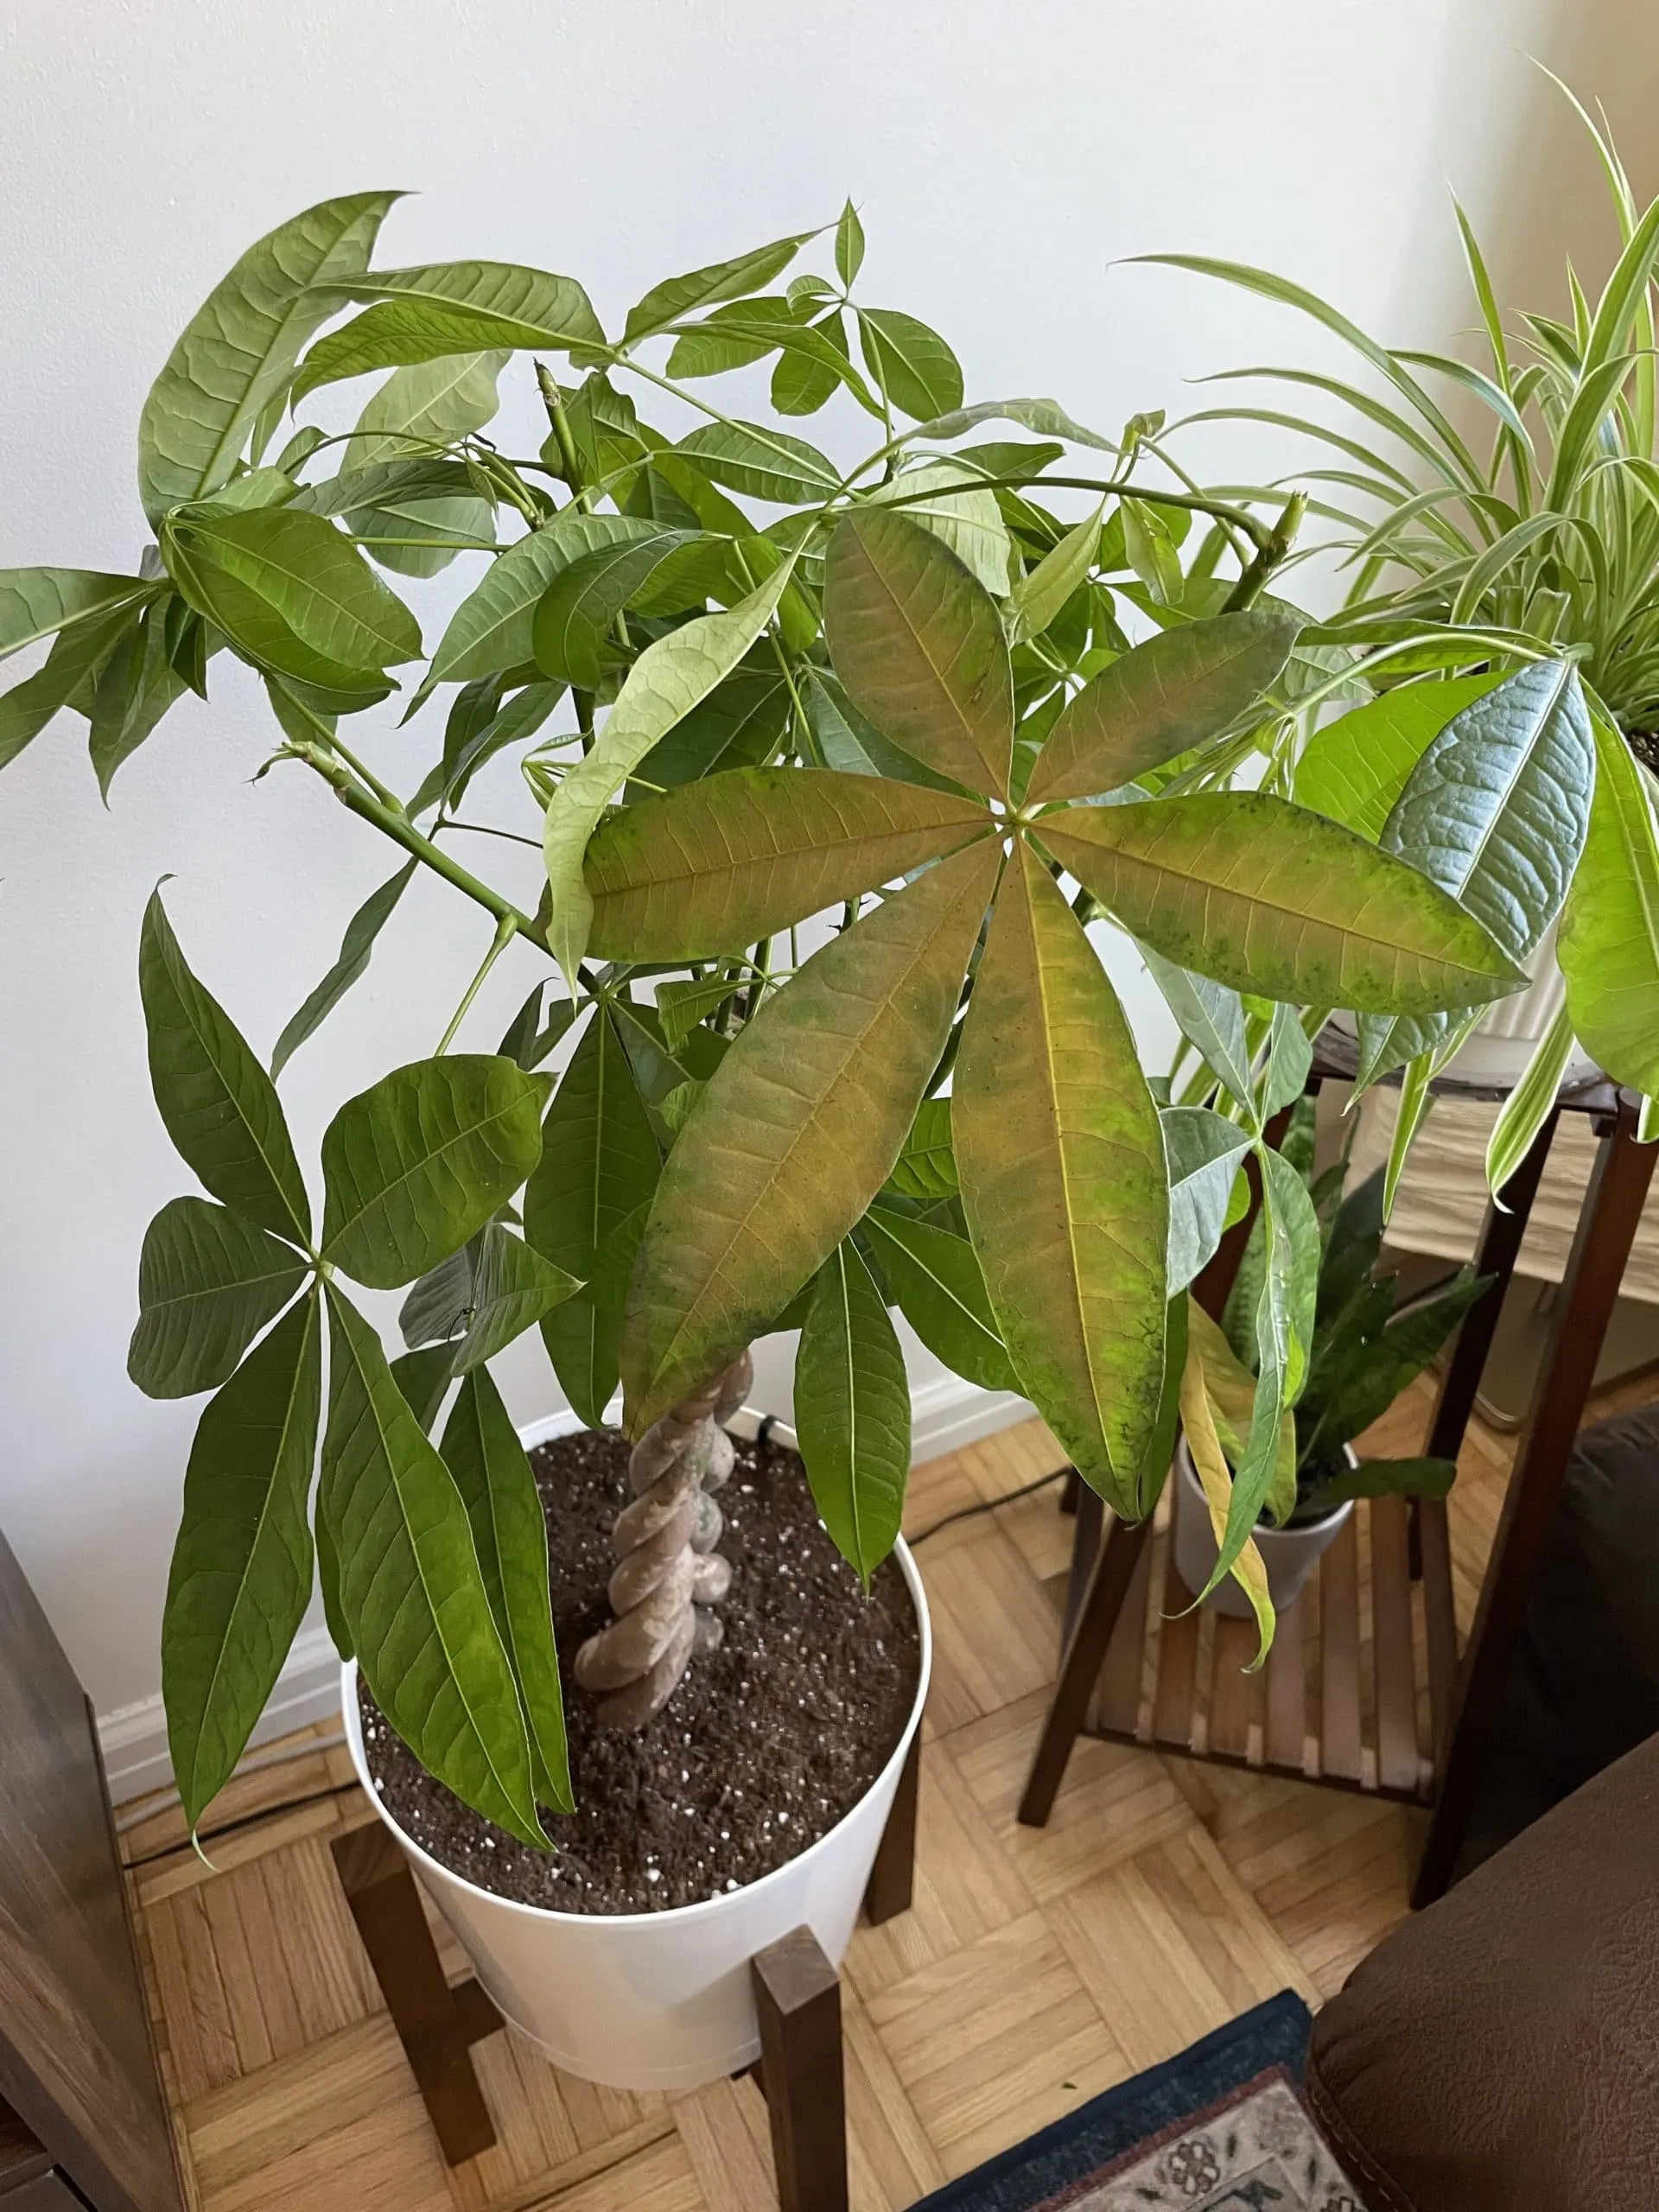 Money tree leaves turning yellow and falling off daily. - Why is my money tree dying?